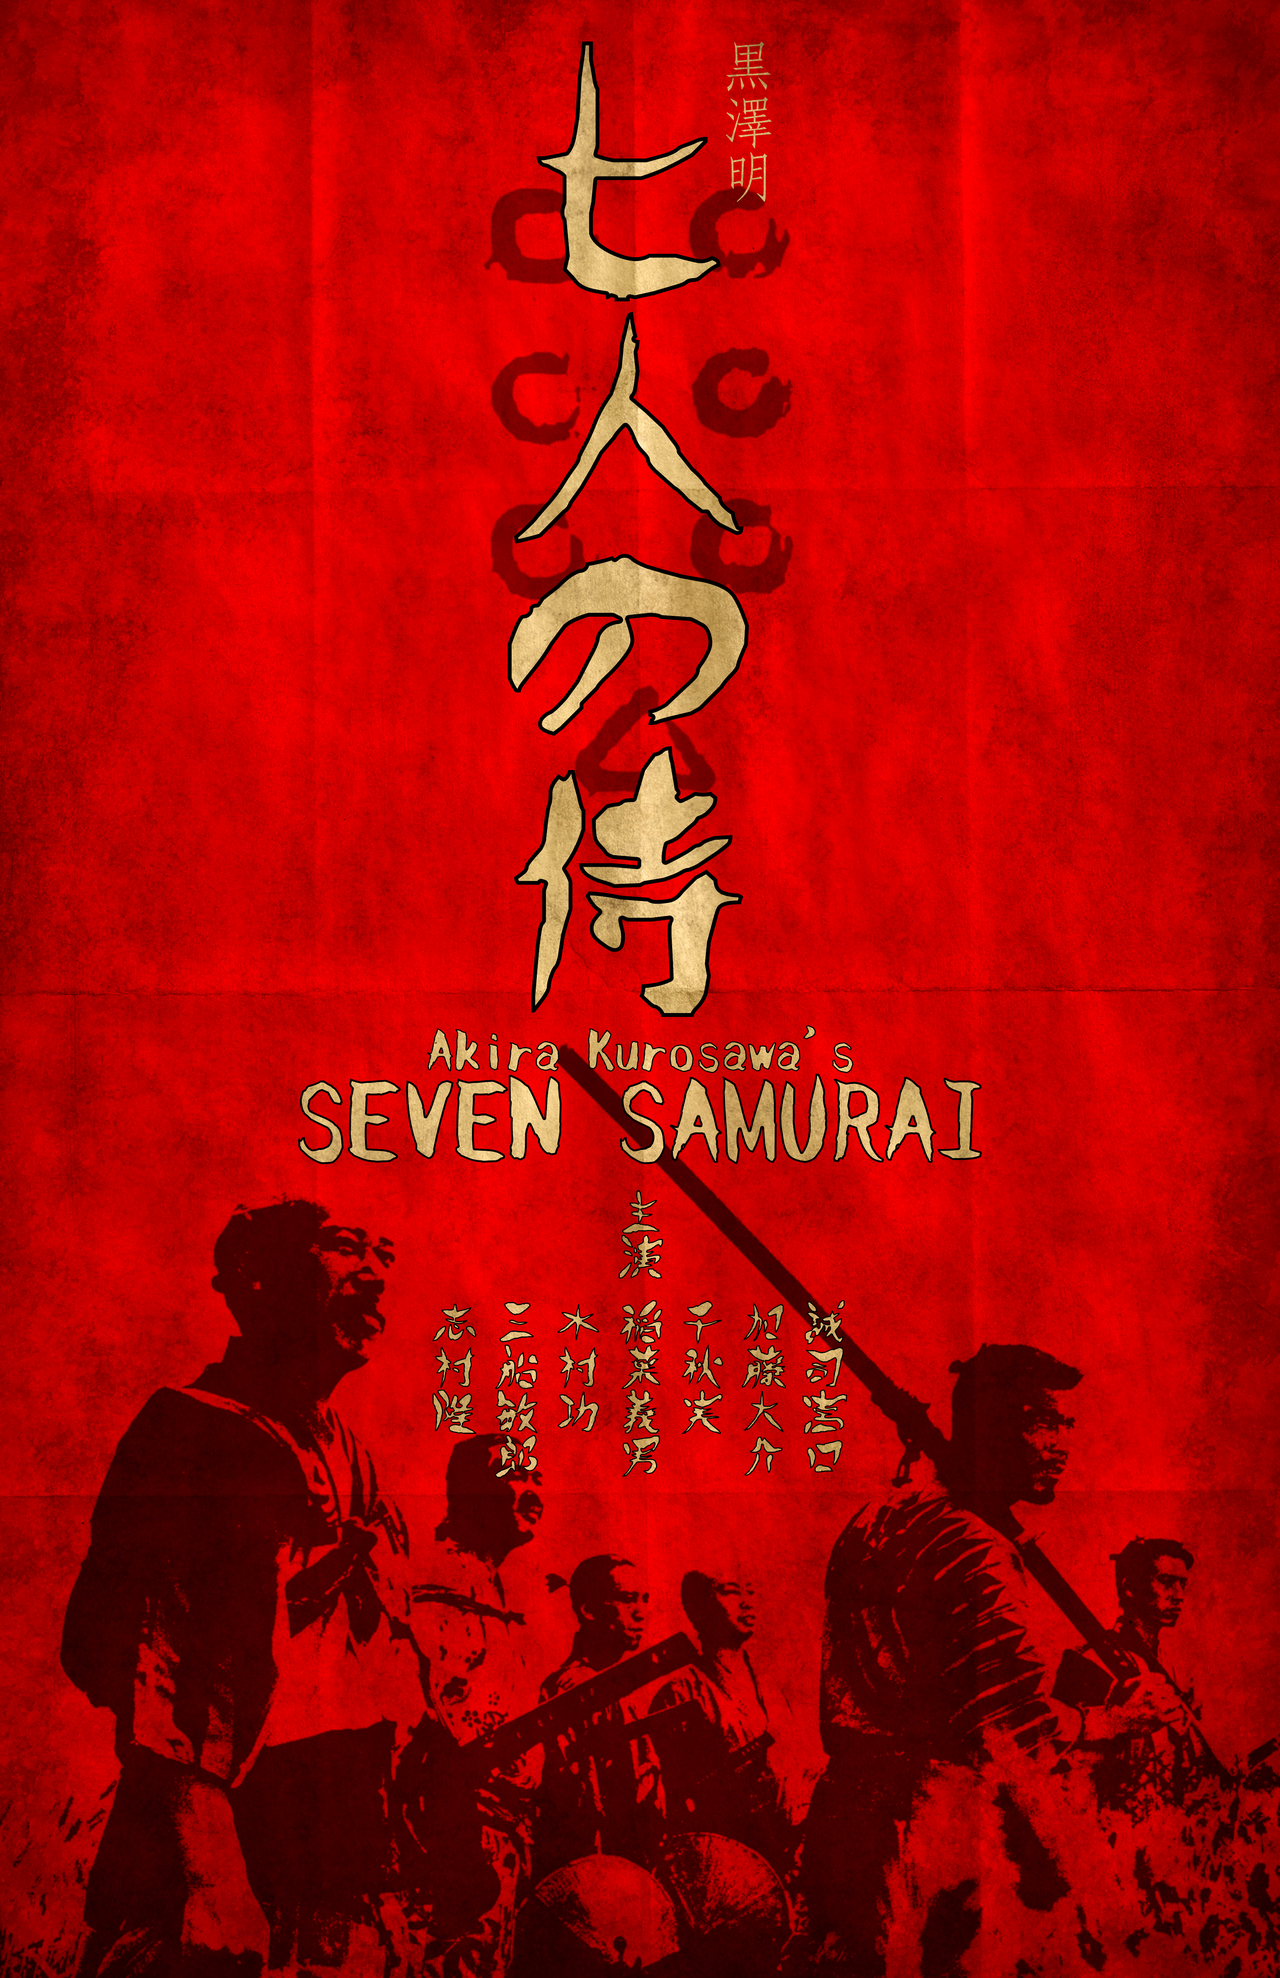 1280x1978 Seven Samurai Poster LARGE by tikiman-akuaku on deviantART | Japanese movie poster, Movie posters design, Classic movie posters